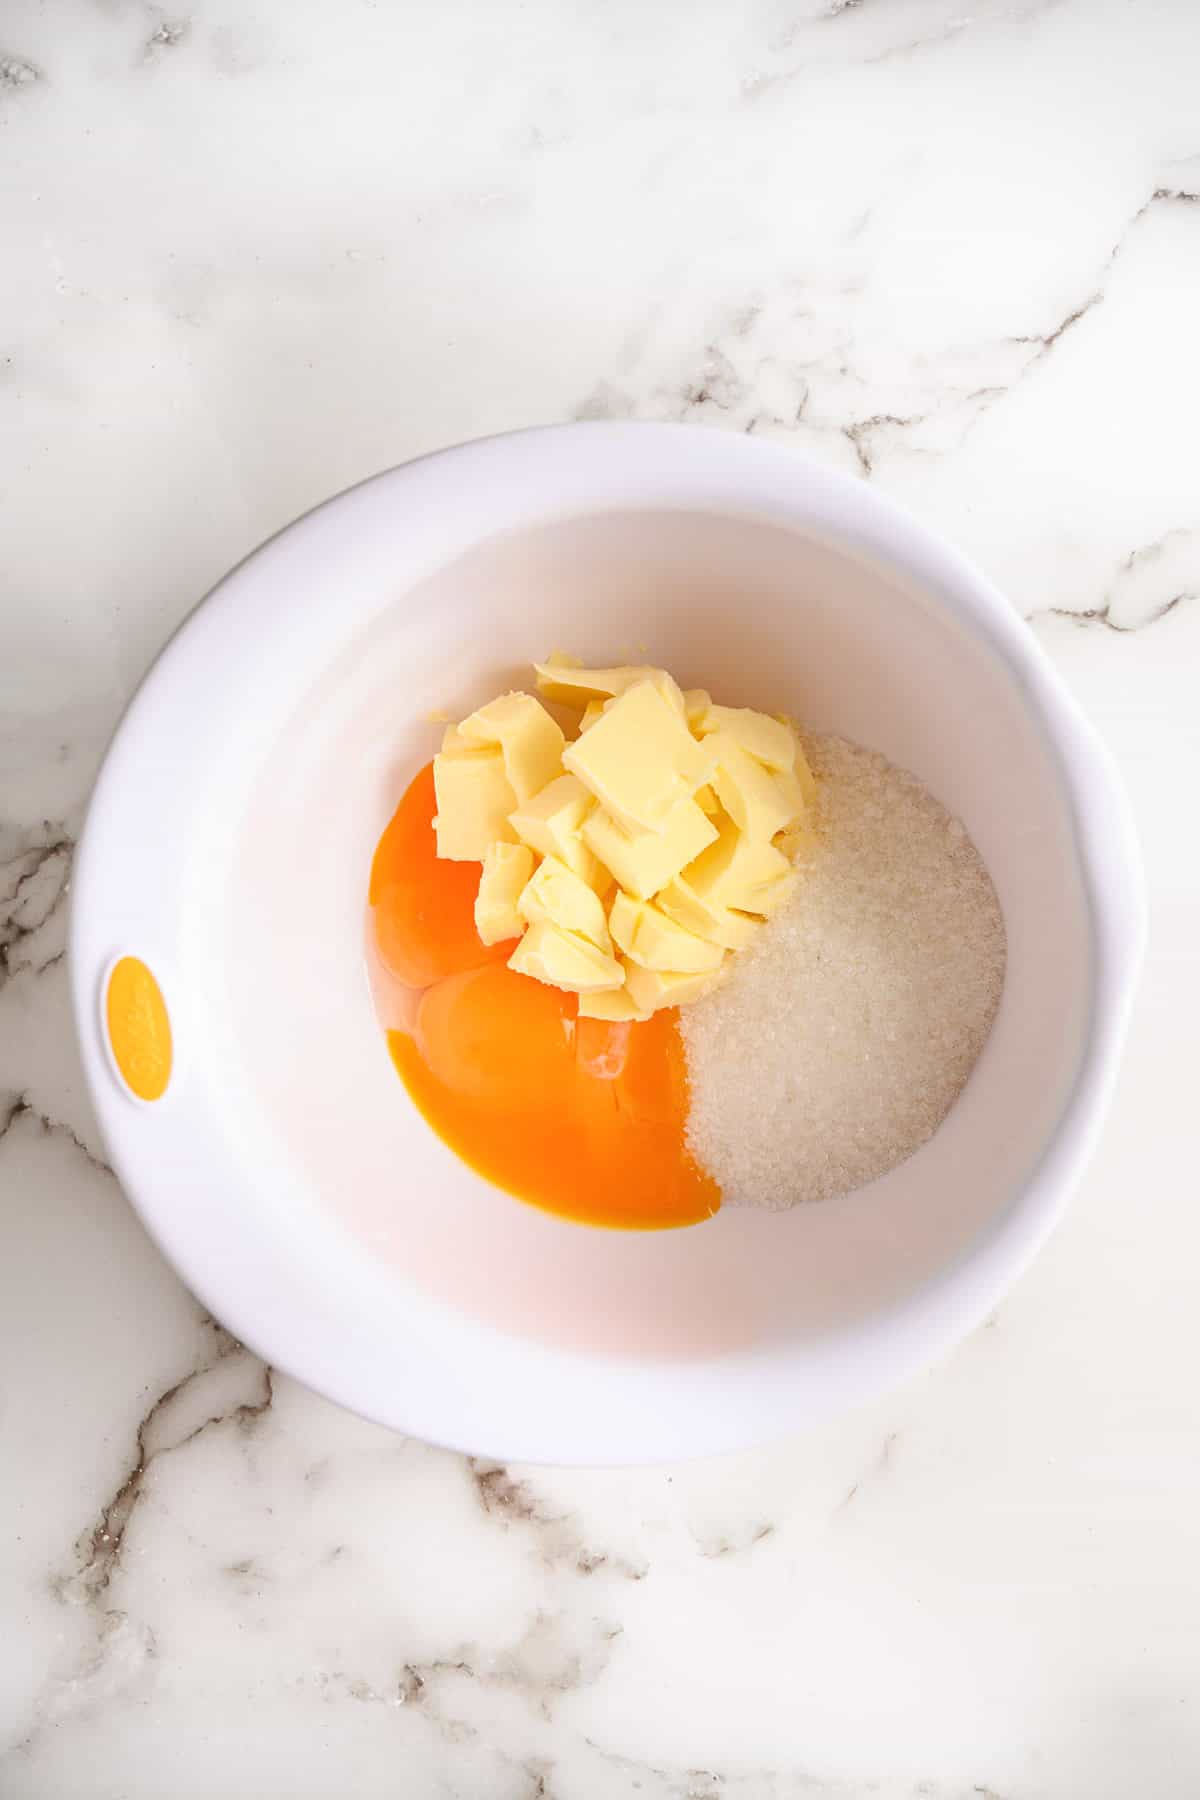 Combining eggs, sugar, and butter in a bowl.